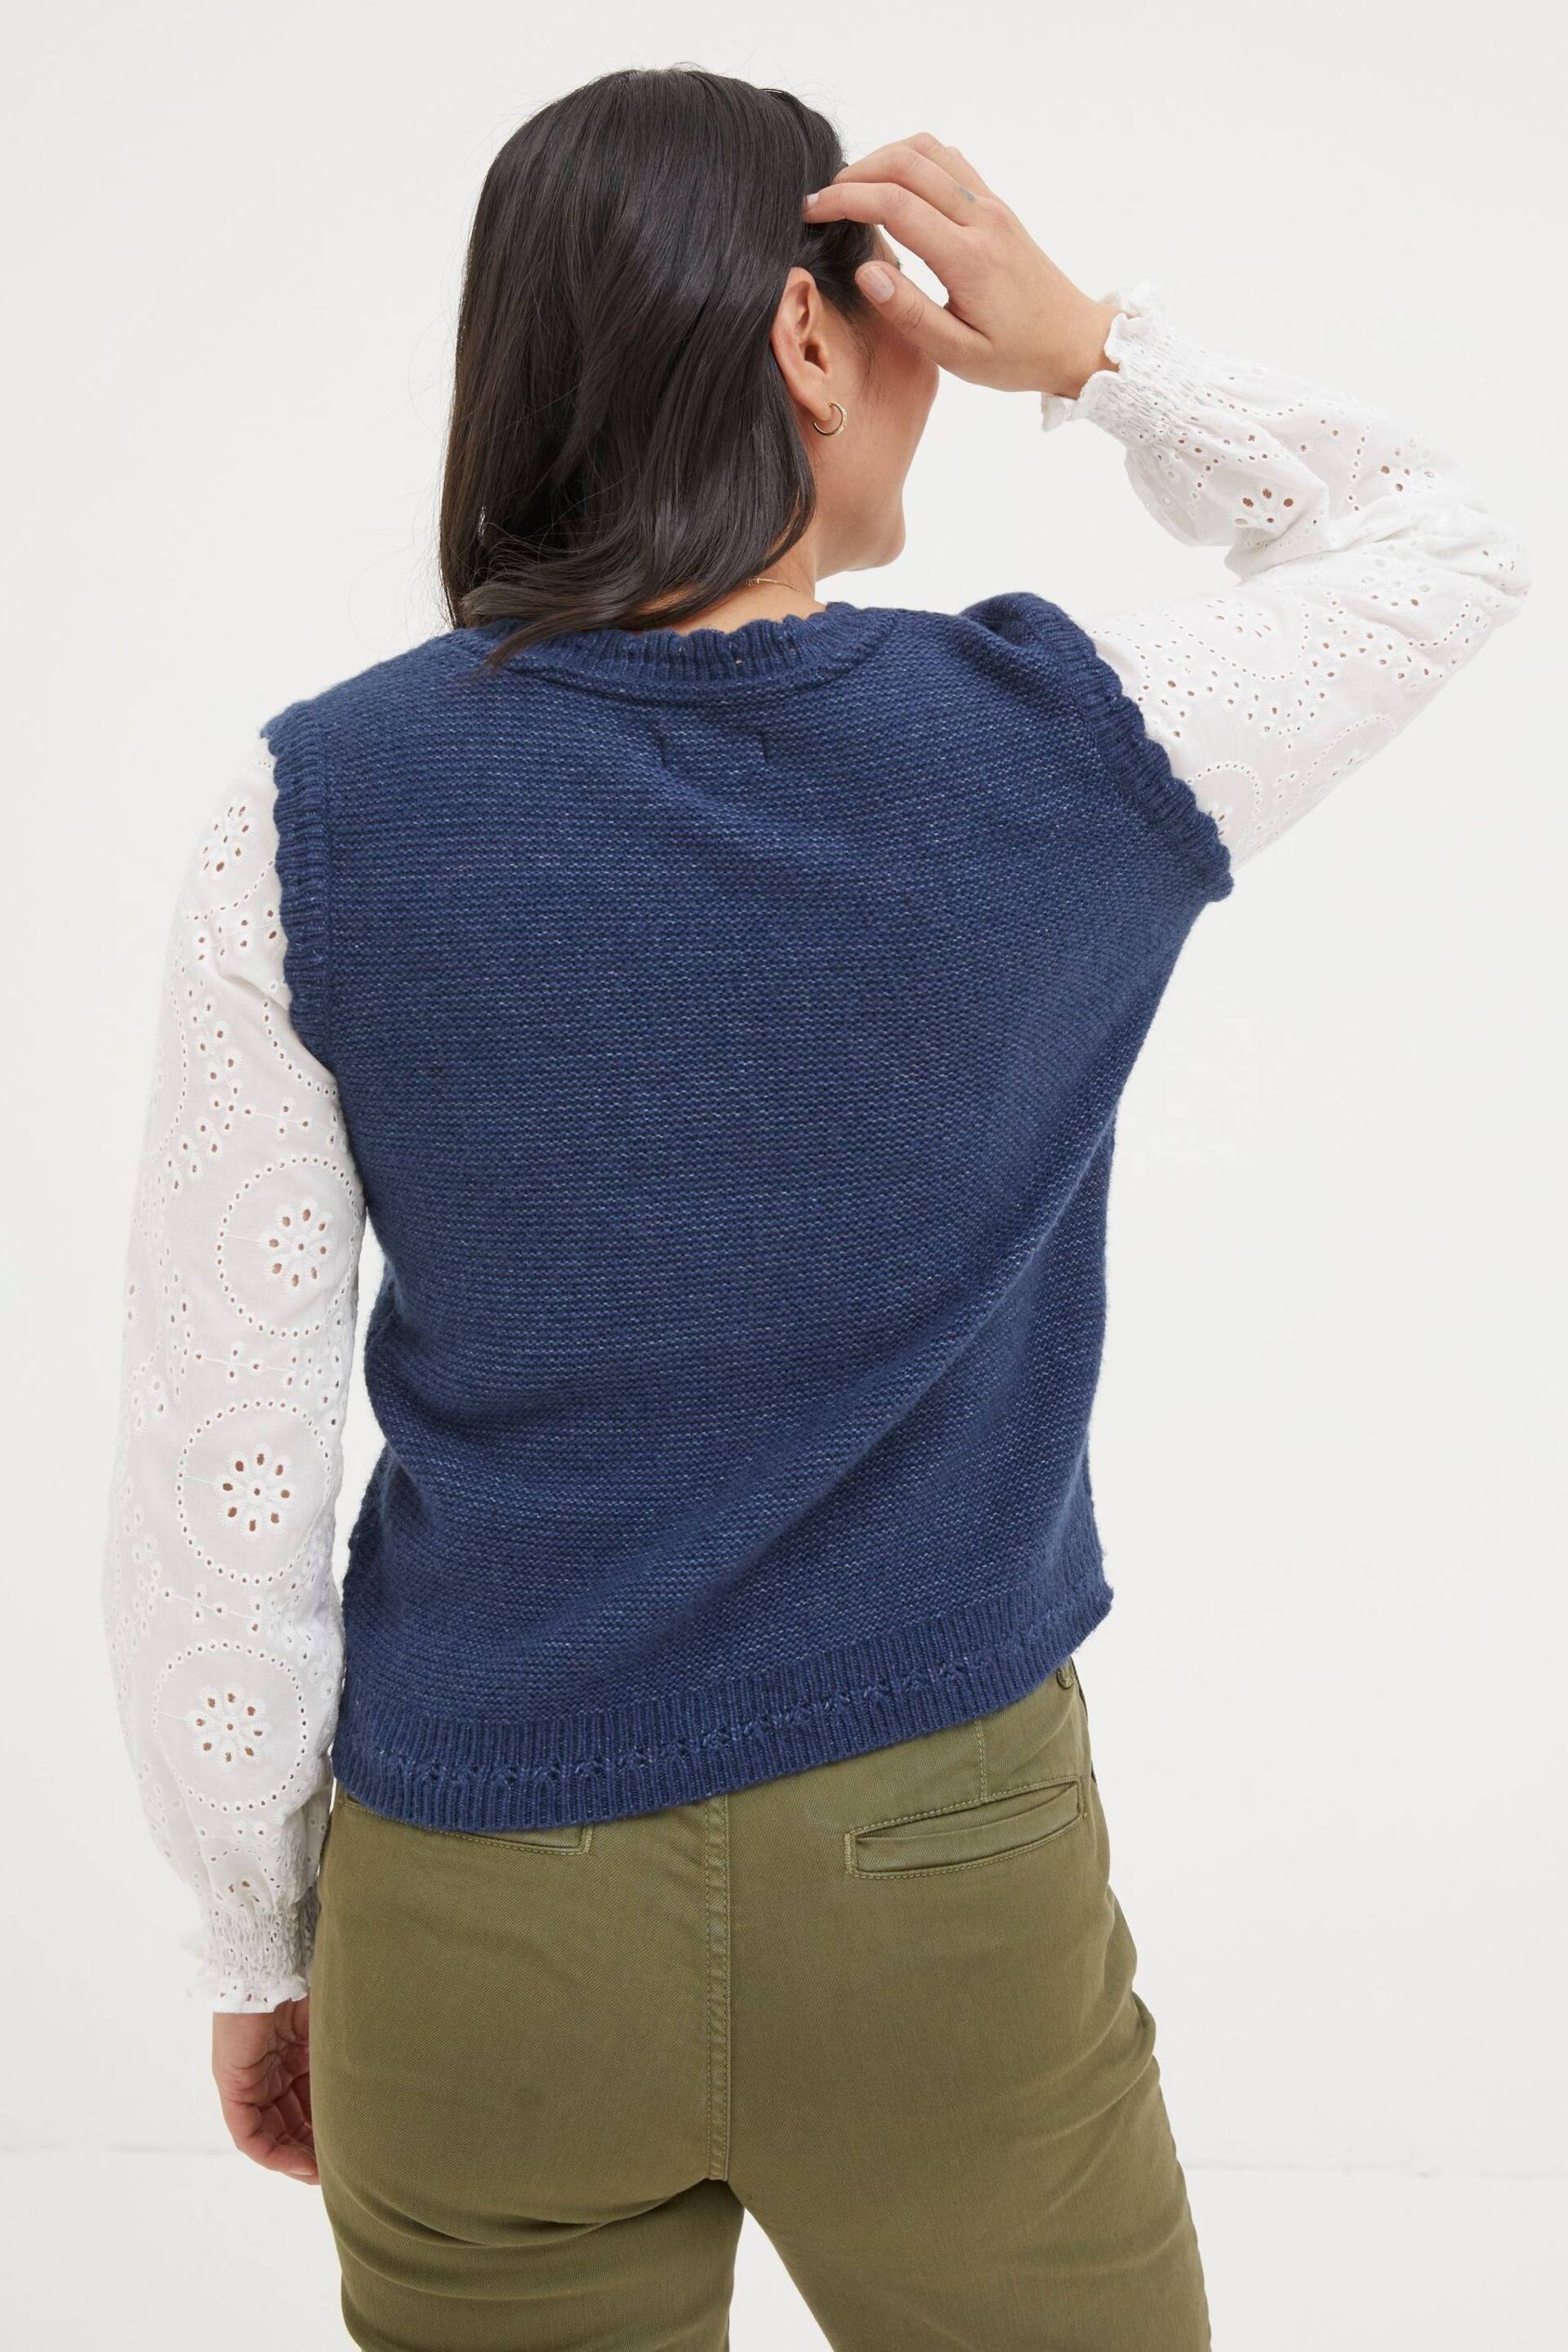 FatFace Blue Winona 2-In-1 Knitted Jumper - Image 3 of 5